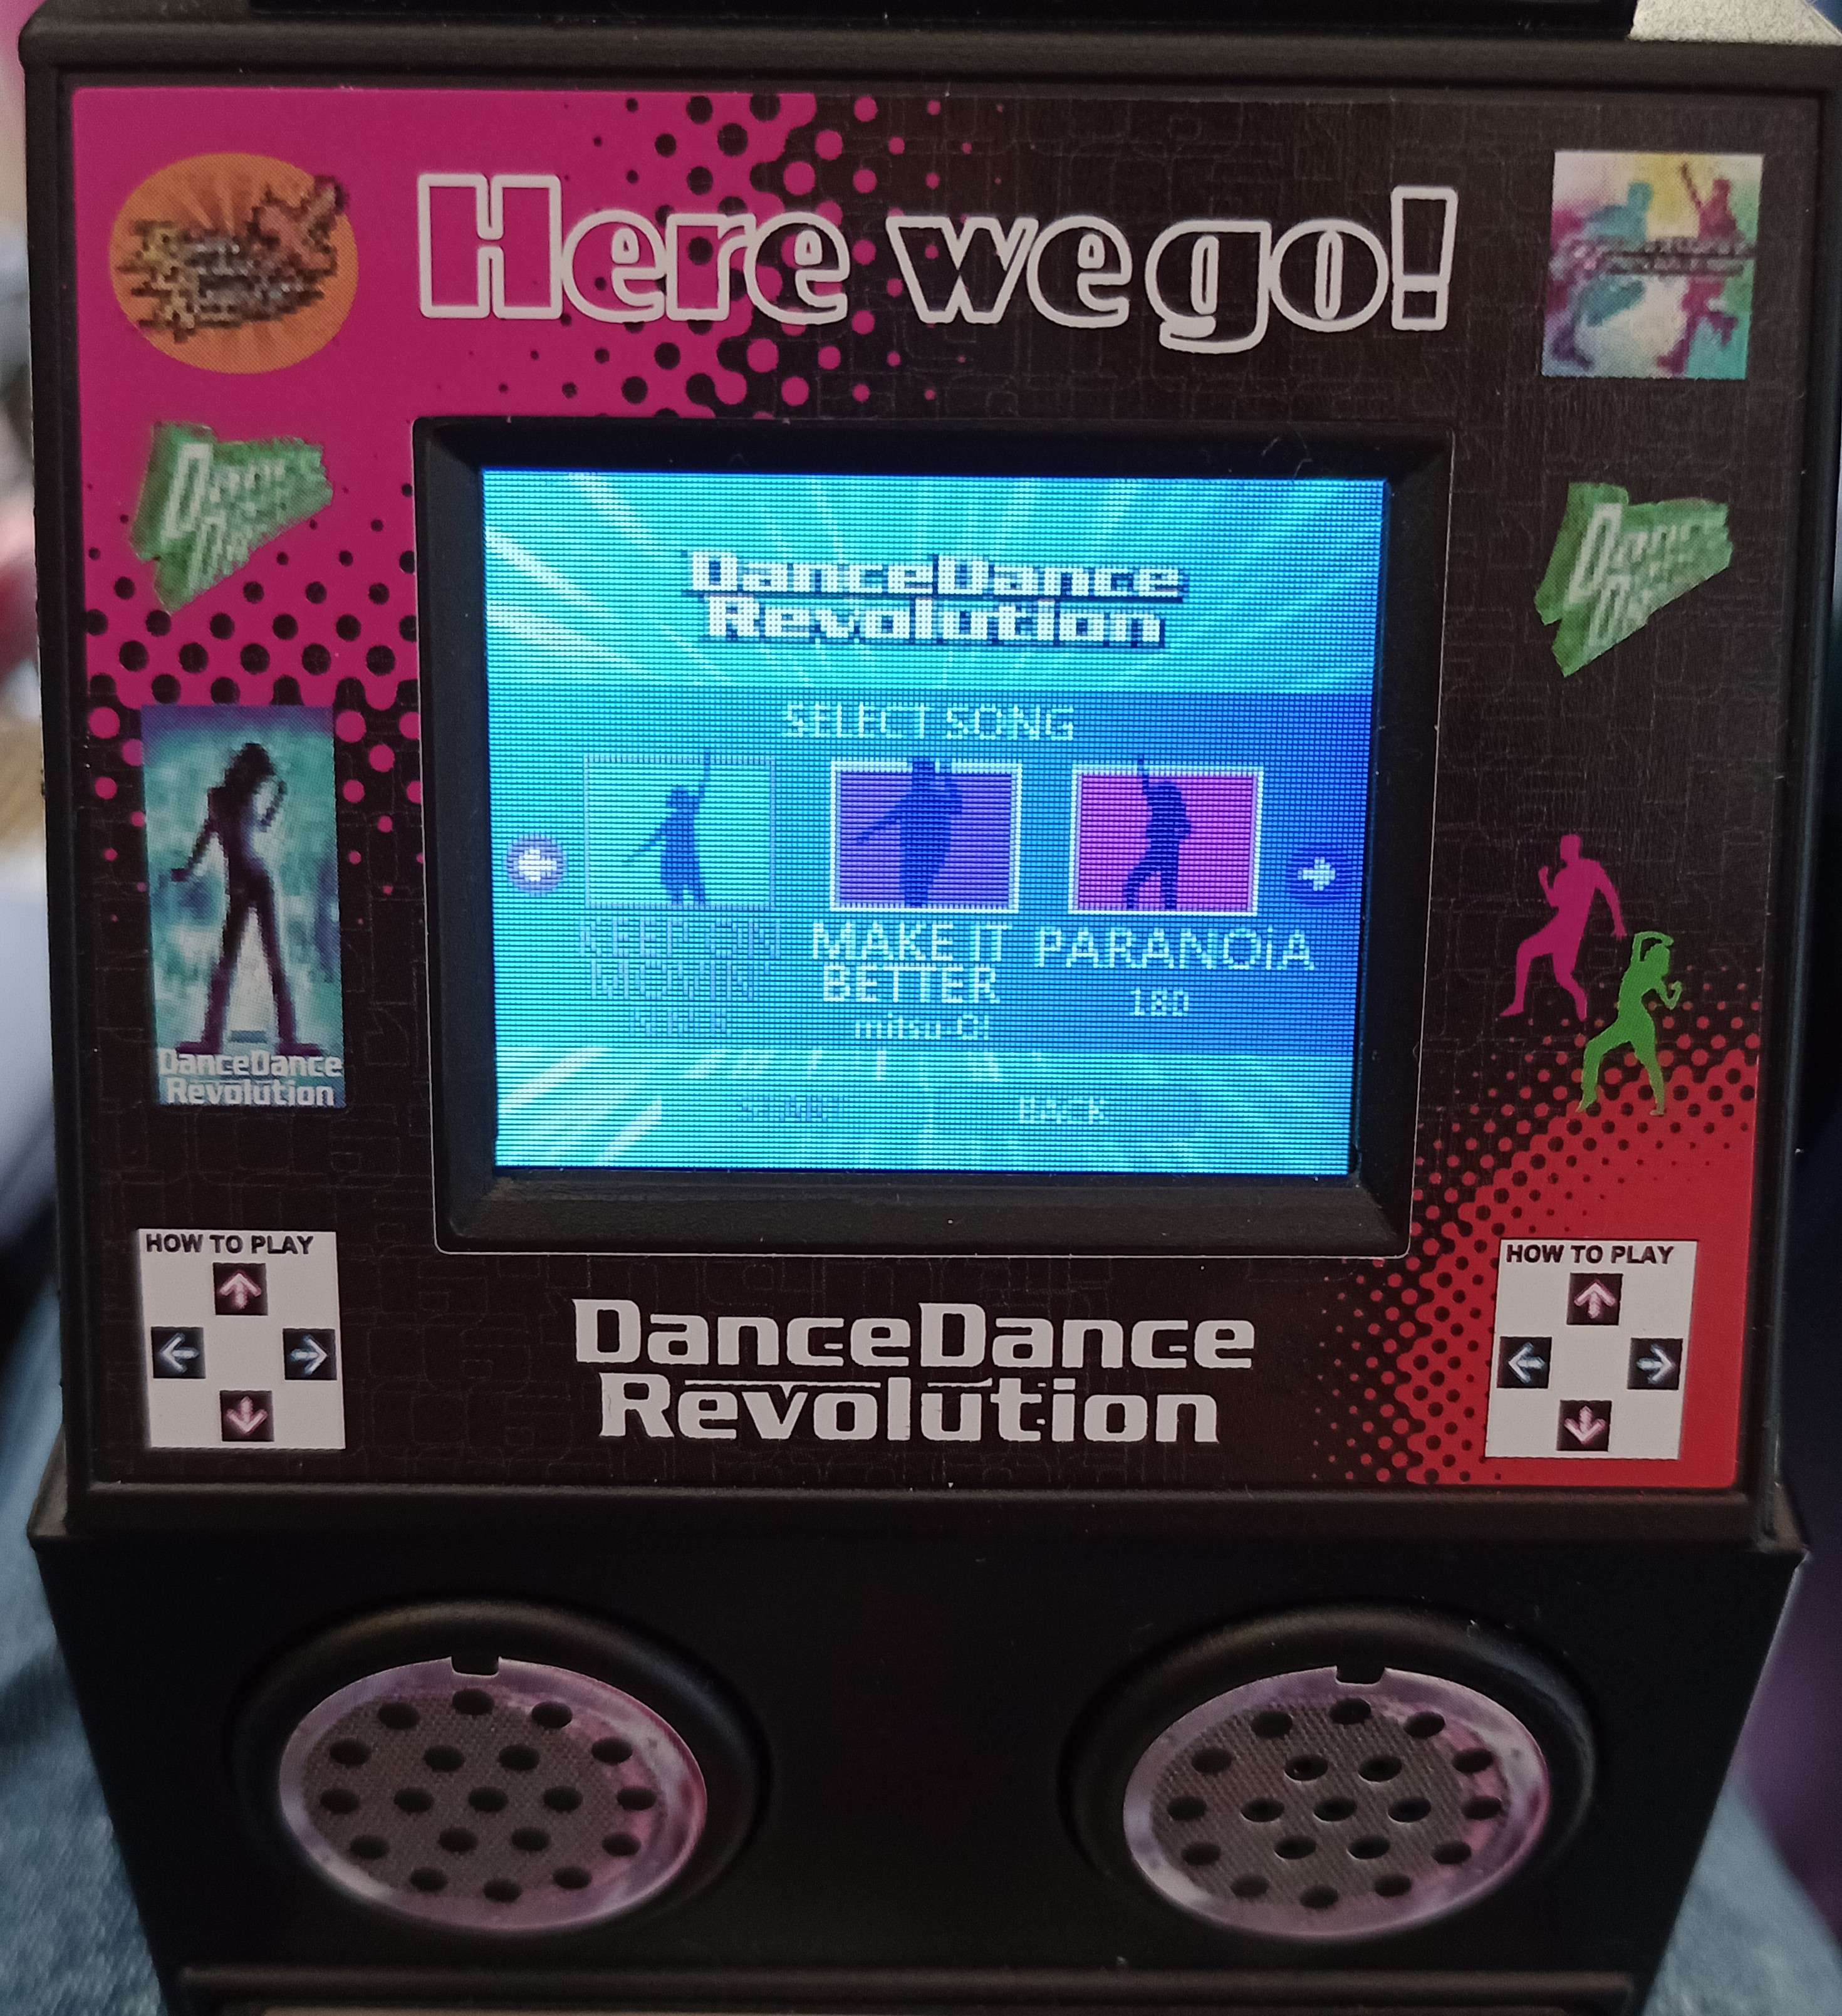 the minicab's screen on the song-select menu, with the ddr x logo visible in the corner of the decals.